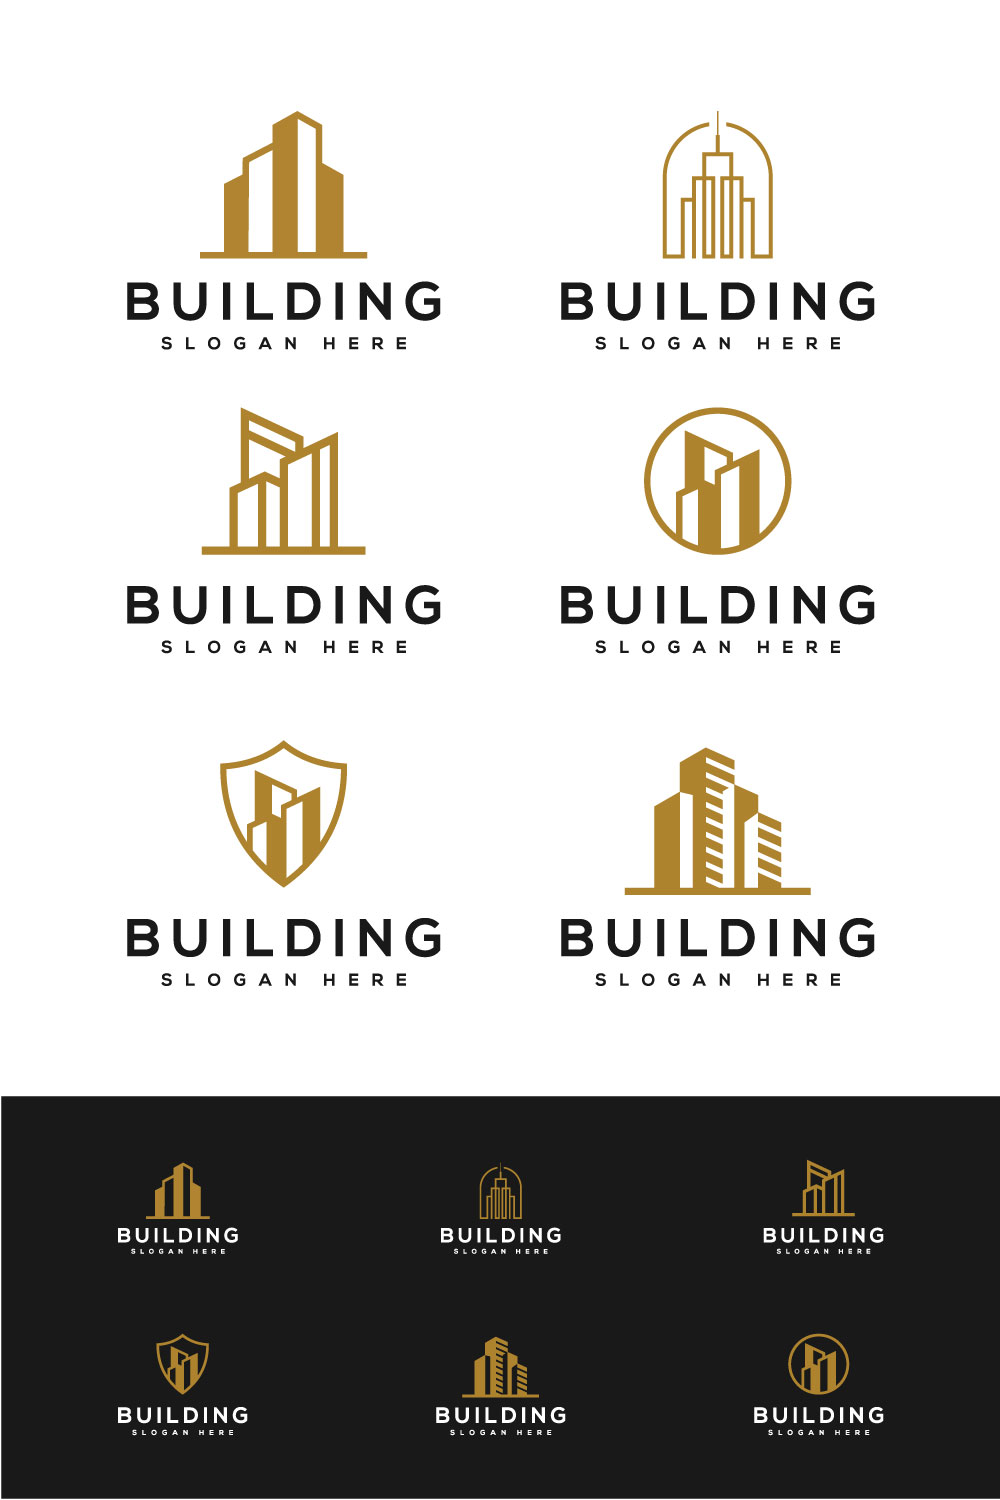 Building Logo with Line Art Style pinterest.